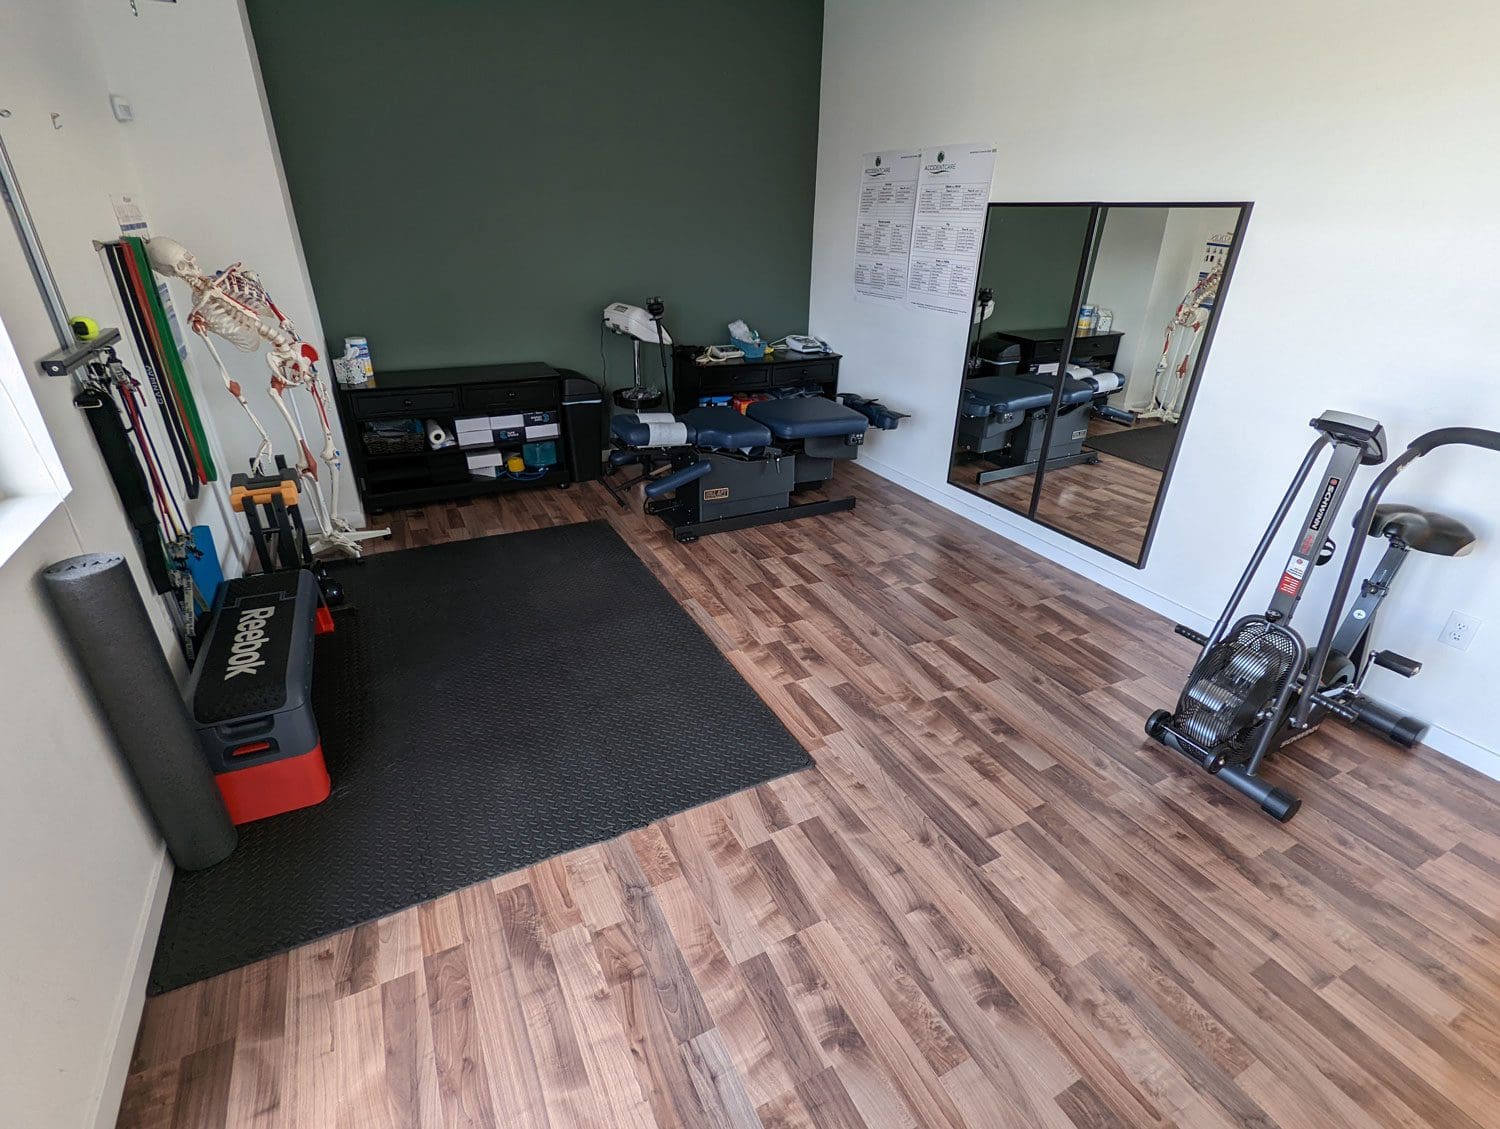 Tigard Chiropractor physical therapy room with exercise and rehabilitation equipment.